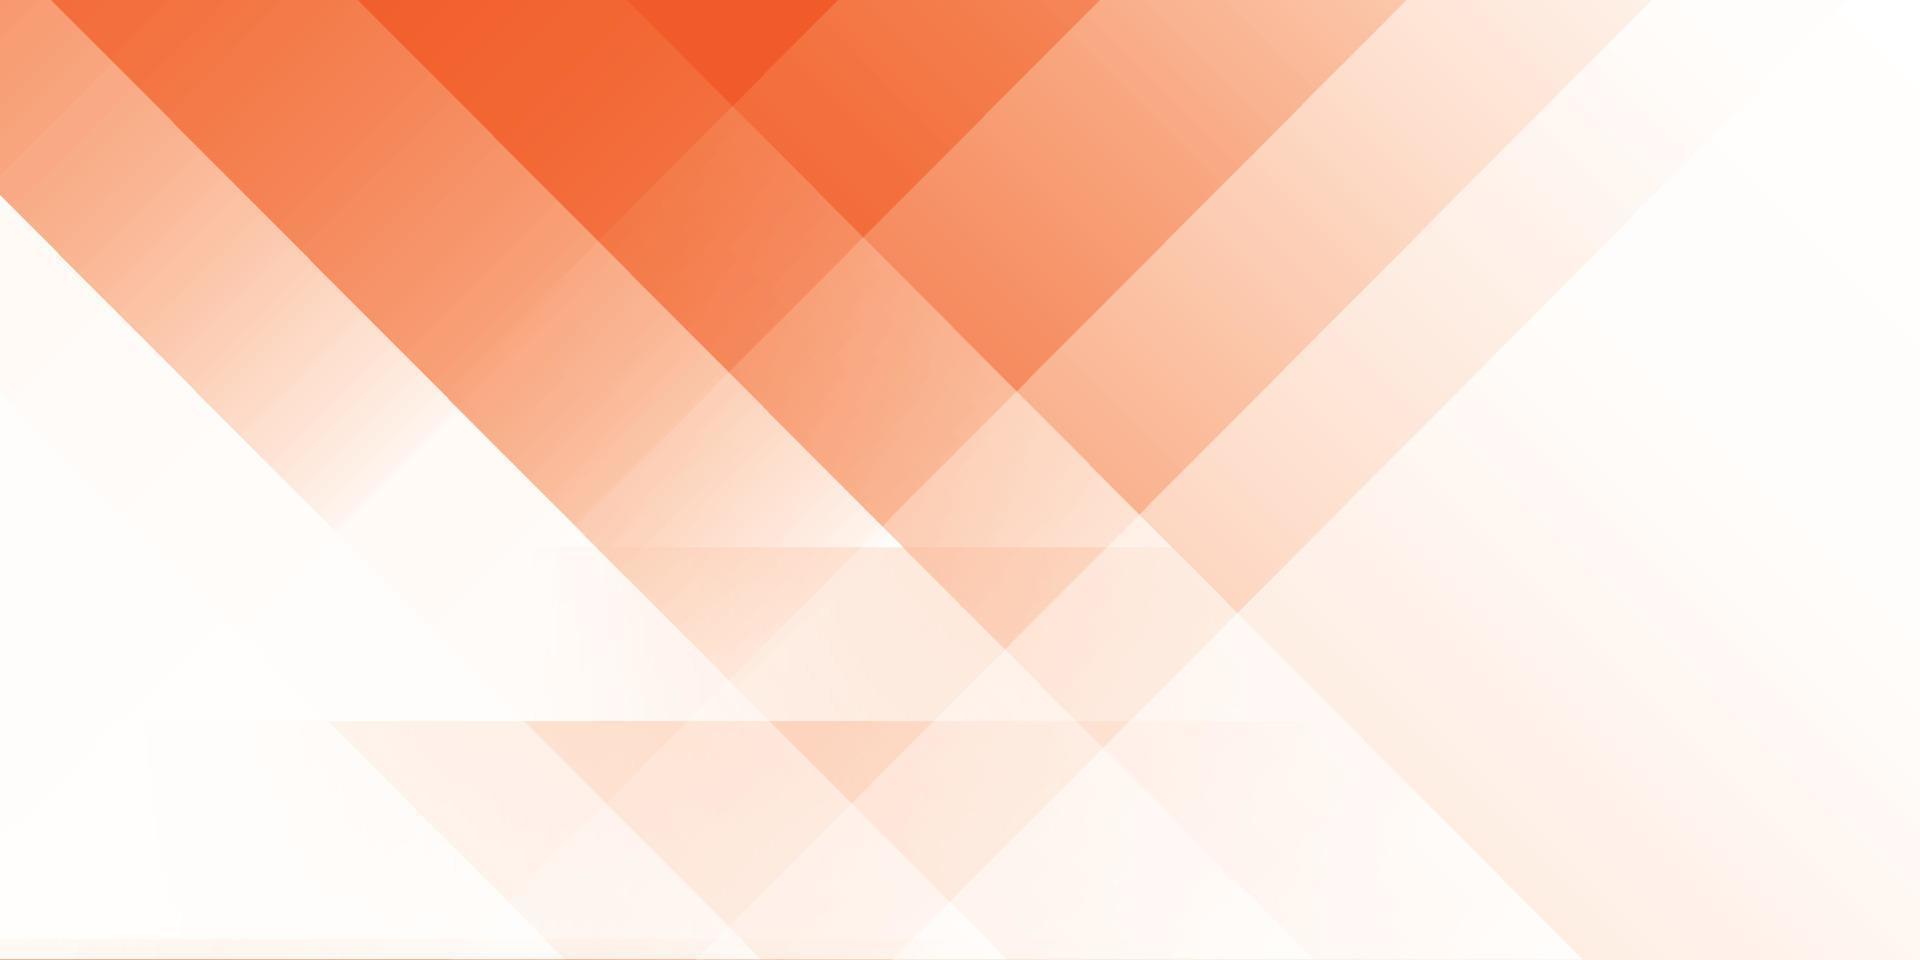 Abstract orange and white color background with geometric shape. Vector illustration.